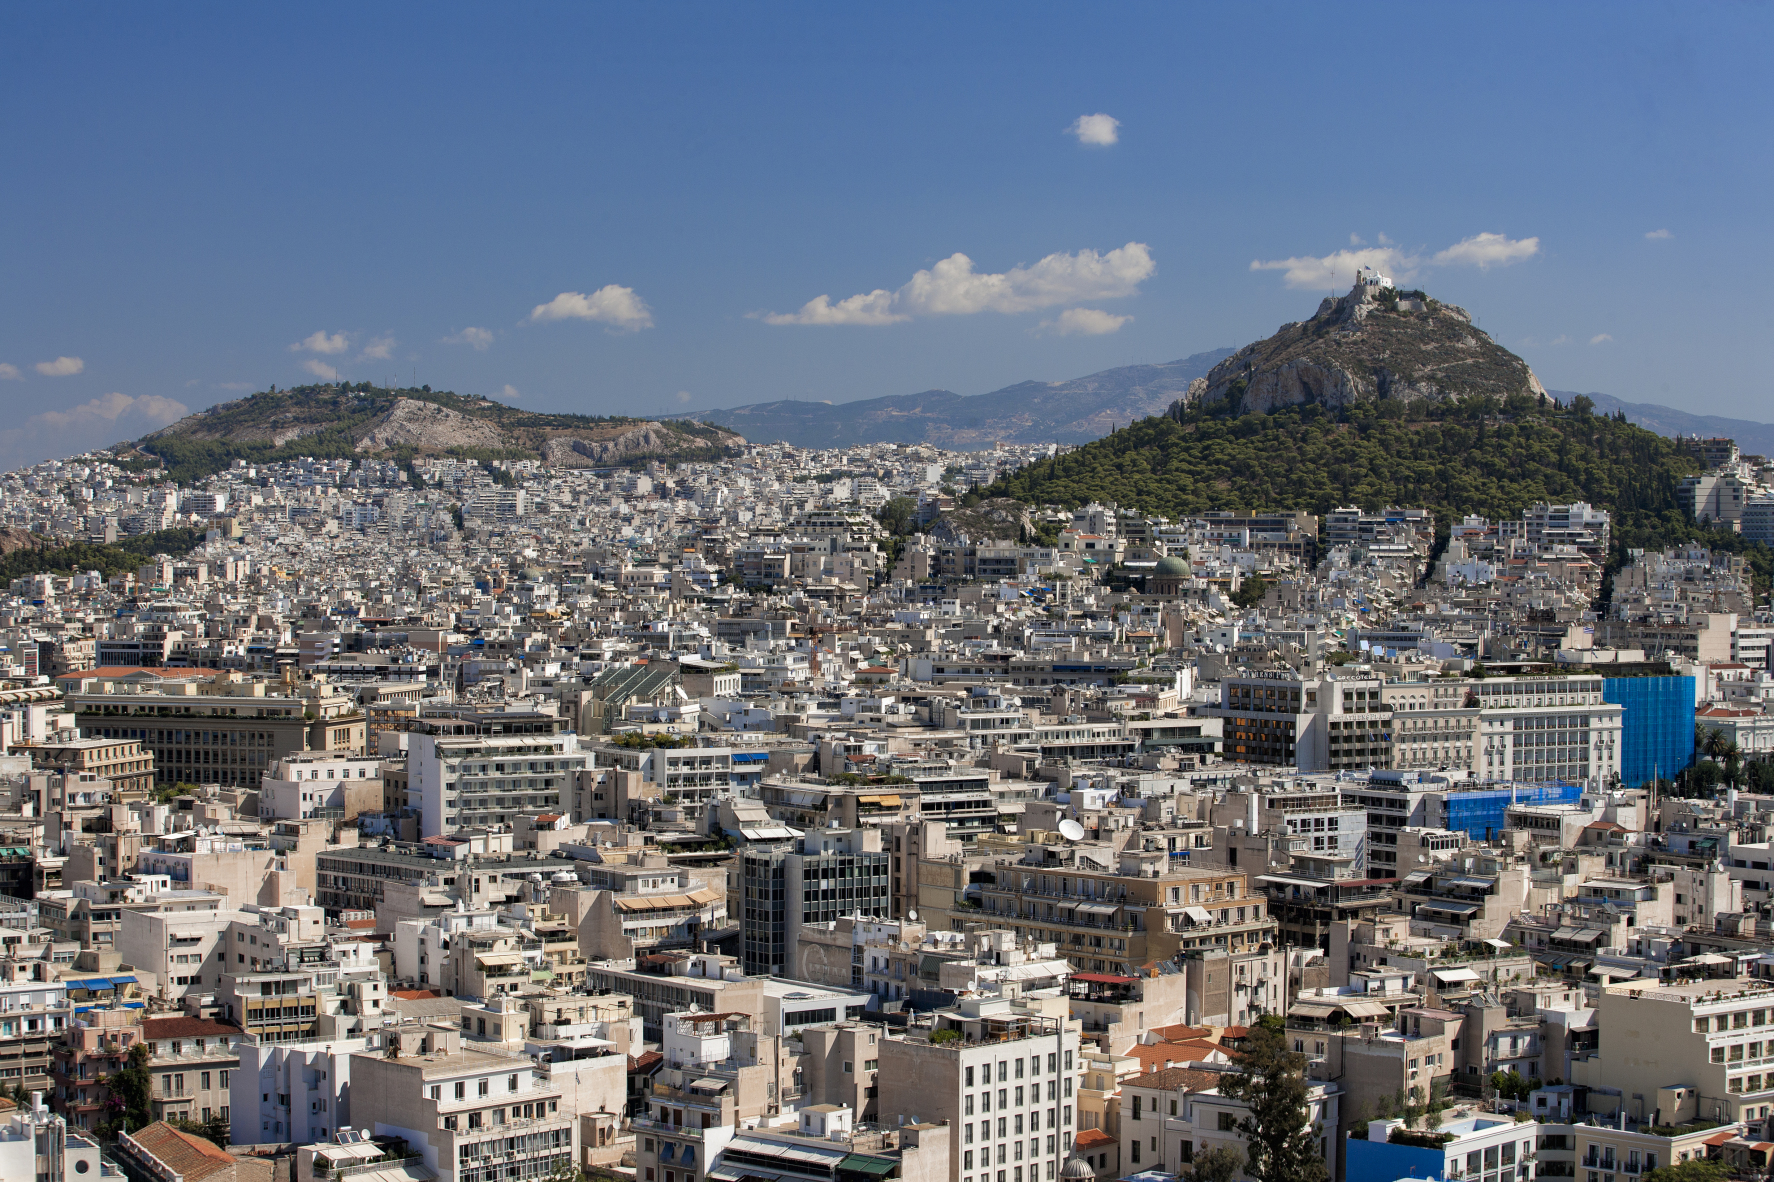 Mount Lykabettos is the highest hill in Athens and provides some of the best views of the city, with a funicular cable car the easiest way to get to the top.